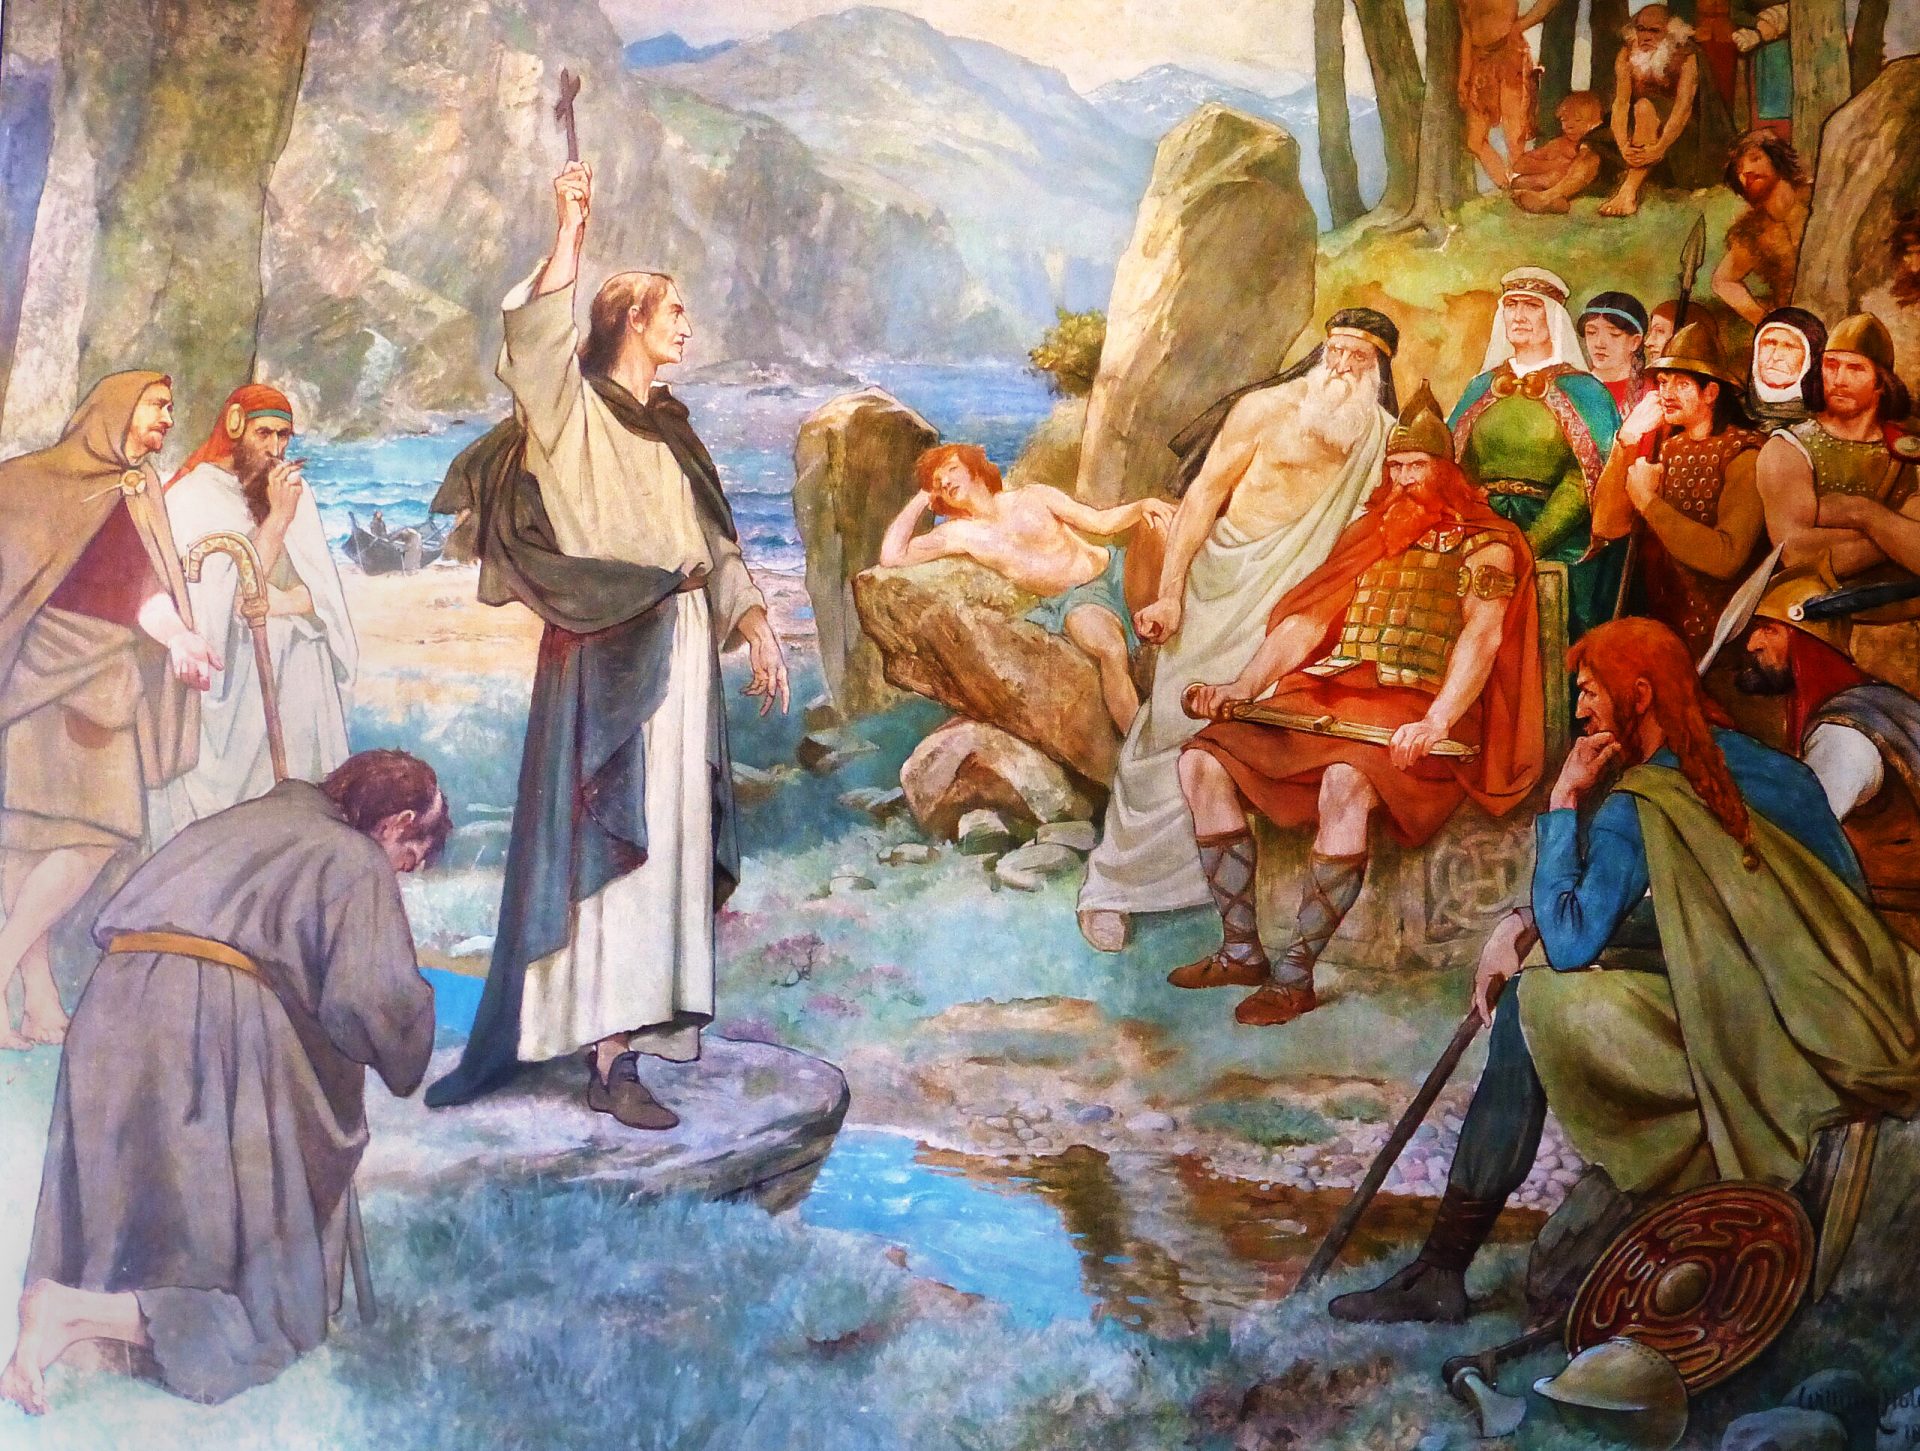 A 19th-century depiction showcasing Saint Columba converting Pictish King Bridei to Christianity. A group of Pictish people in a rocky landscape with a river and mountains in the background. The people are dressed in traditional clothing from the medieval period. The central figure is a man in a white robe holding up a cross, possibly representing Saint Columba. To the left of the central figure, there is a man kneeling in prayer, showing devotion and reverence. To the right of the central figure, there are several people sitting and standing on rocks, observing and listening to him. The background consists of a river and mountains with trees and shrubs, creating a natural and scenic setting. The colors in the painting are predominantly blue, green, and brown, giving a sense of calmness and harmony. The painting has a realistic style, showing details and proportions accurately.